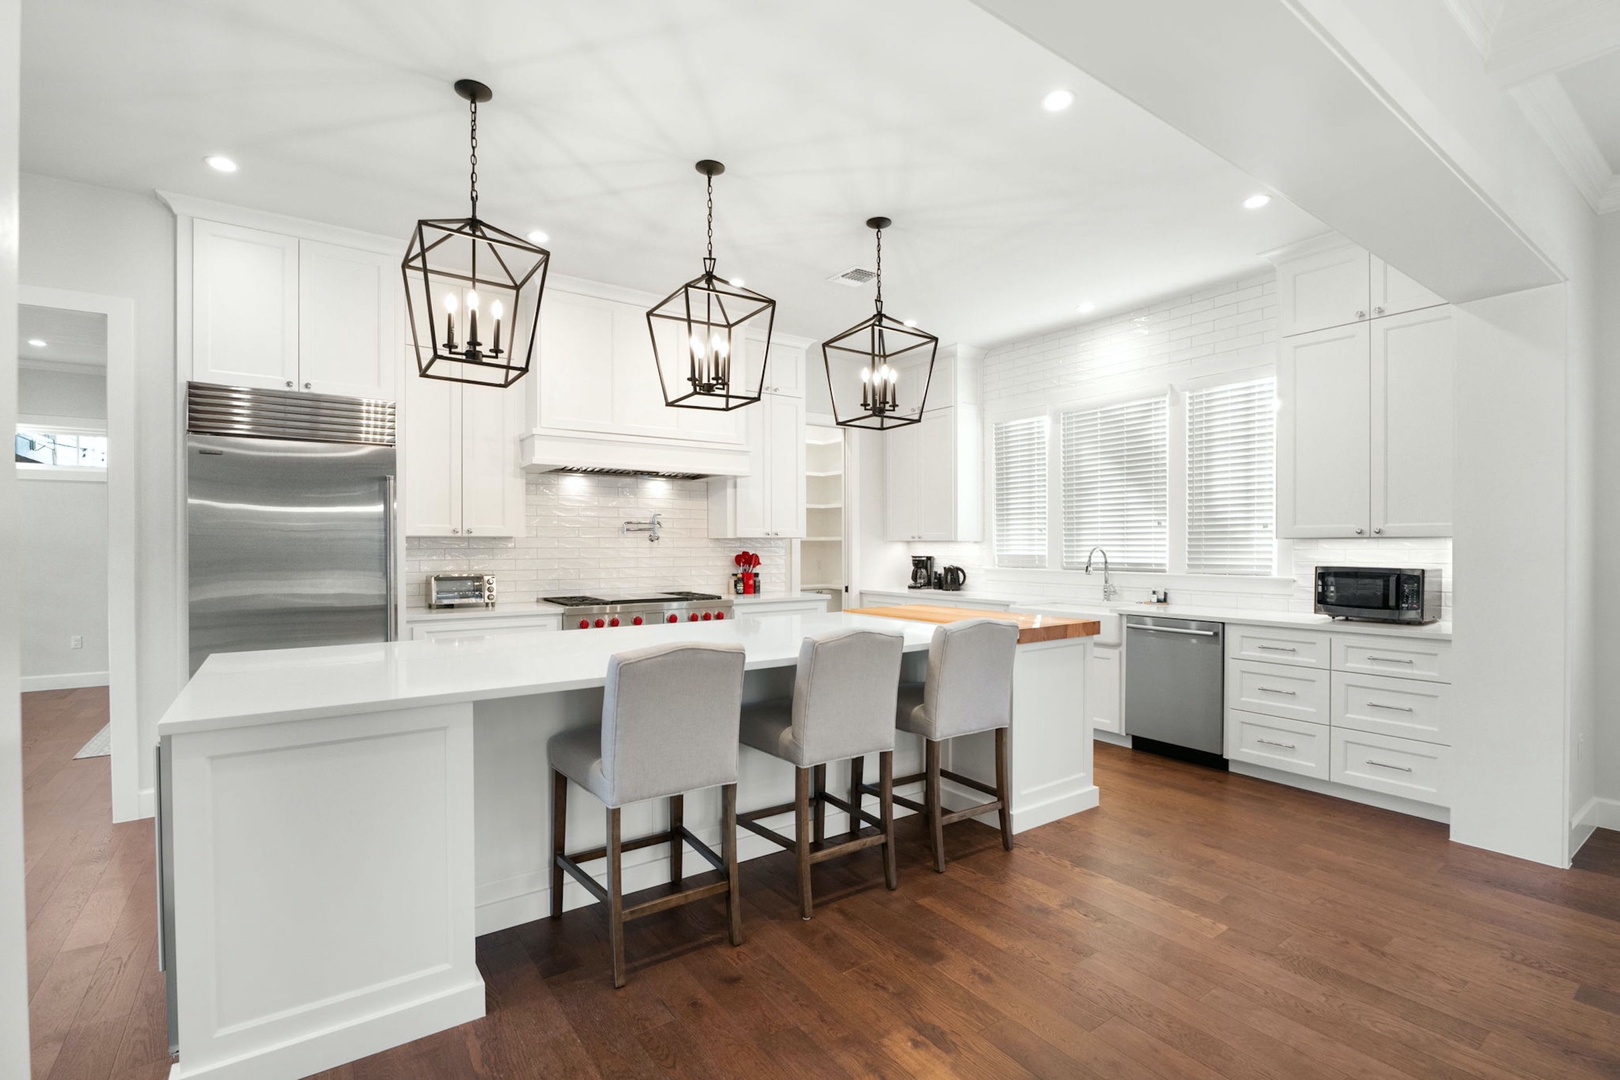 Create culinary delights in the fully equipped kitchen